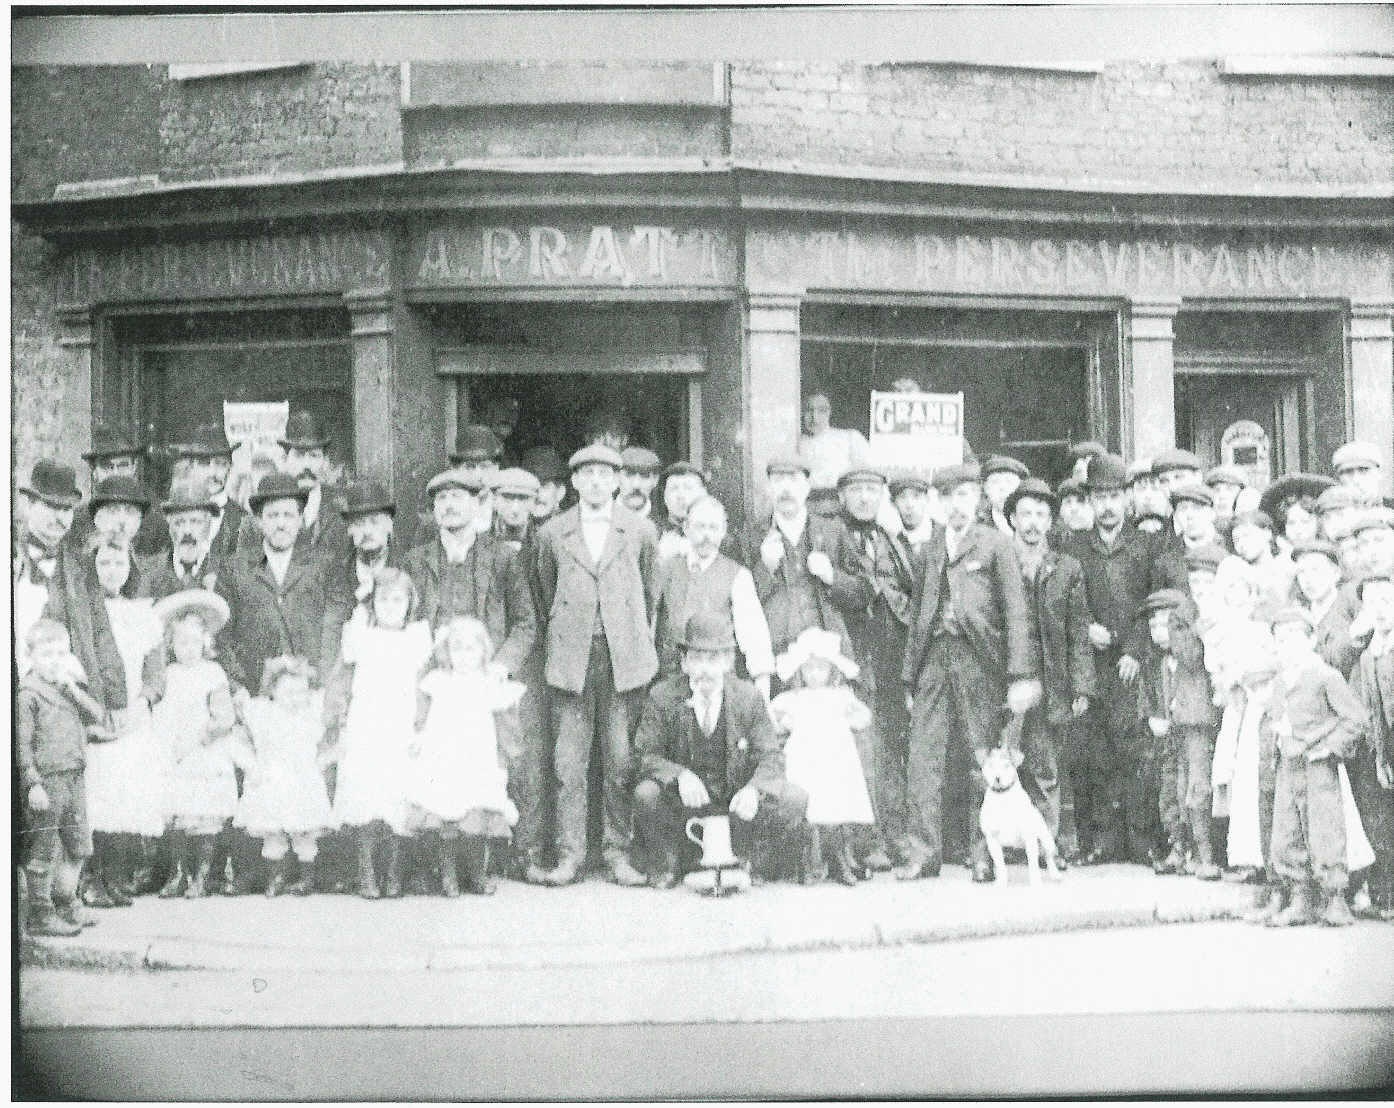 A family photograph that belongs to my grandmother (nee Pratt) We have dated the photograph to around 1910. My grandmother says that she was inside the pub when the picture was taken (yes she will be 100 years old this December - 2006) and it was taken after a boxing match she thinks. The name A Pratt above the door is in reference to William Charles Pratt's mother. The pub belonged to his father William Pratt and he died in 1883 and left his estate to Anne Pratt. William Charles Pratt died in 1910. **